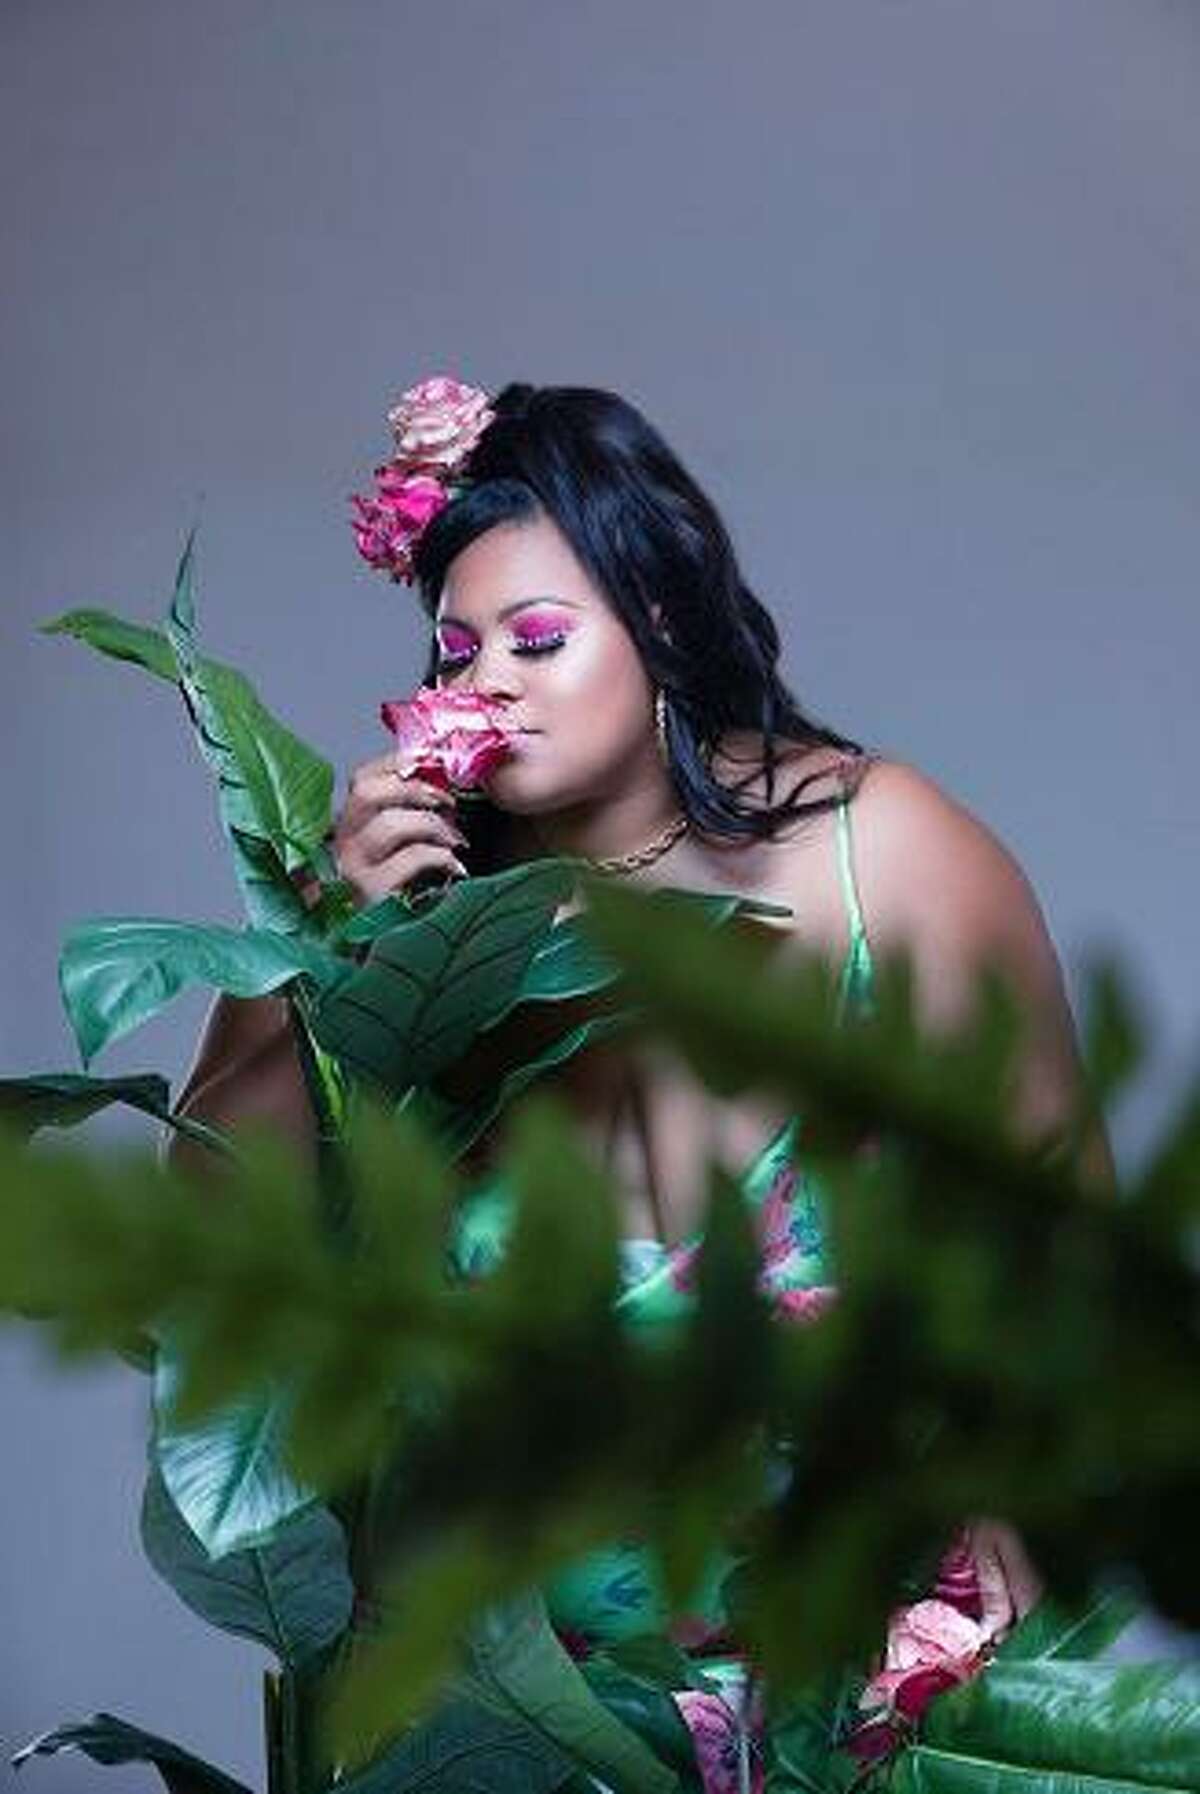 Sasha Caldwell, one of the models on the upcoming “Curvy Girls” calendar that will raise money for charities related to cancer.